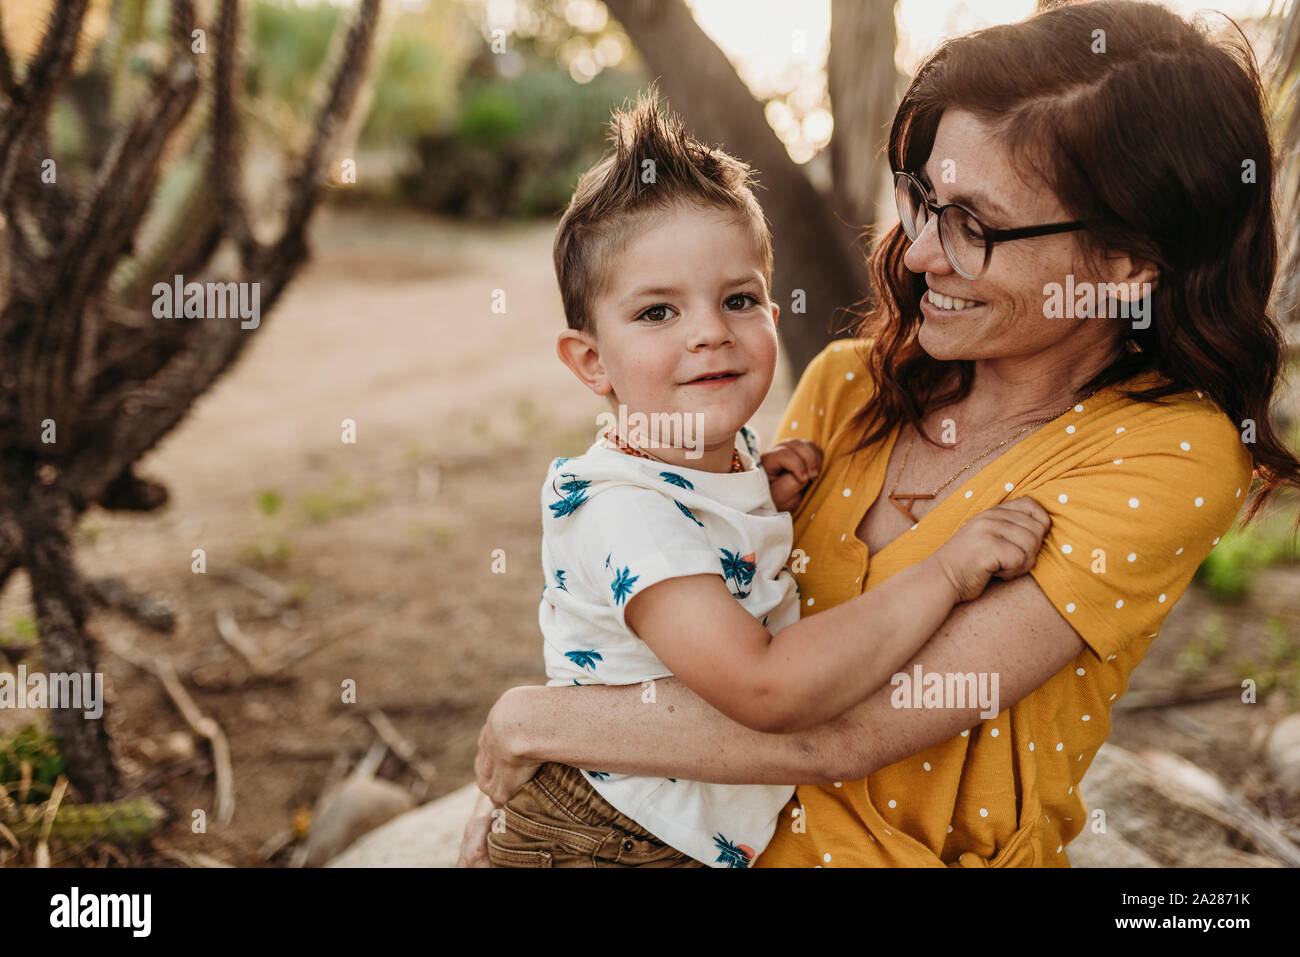 Mother holding young son and smiling in backlit cactus garden Stock Photo